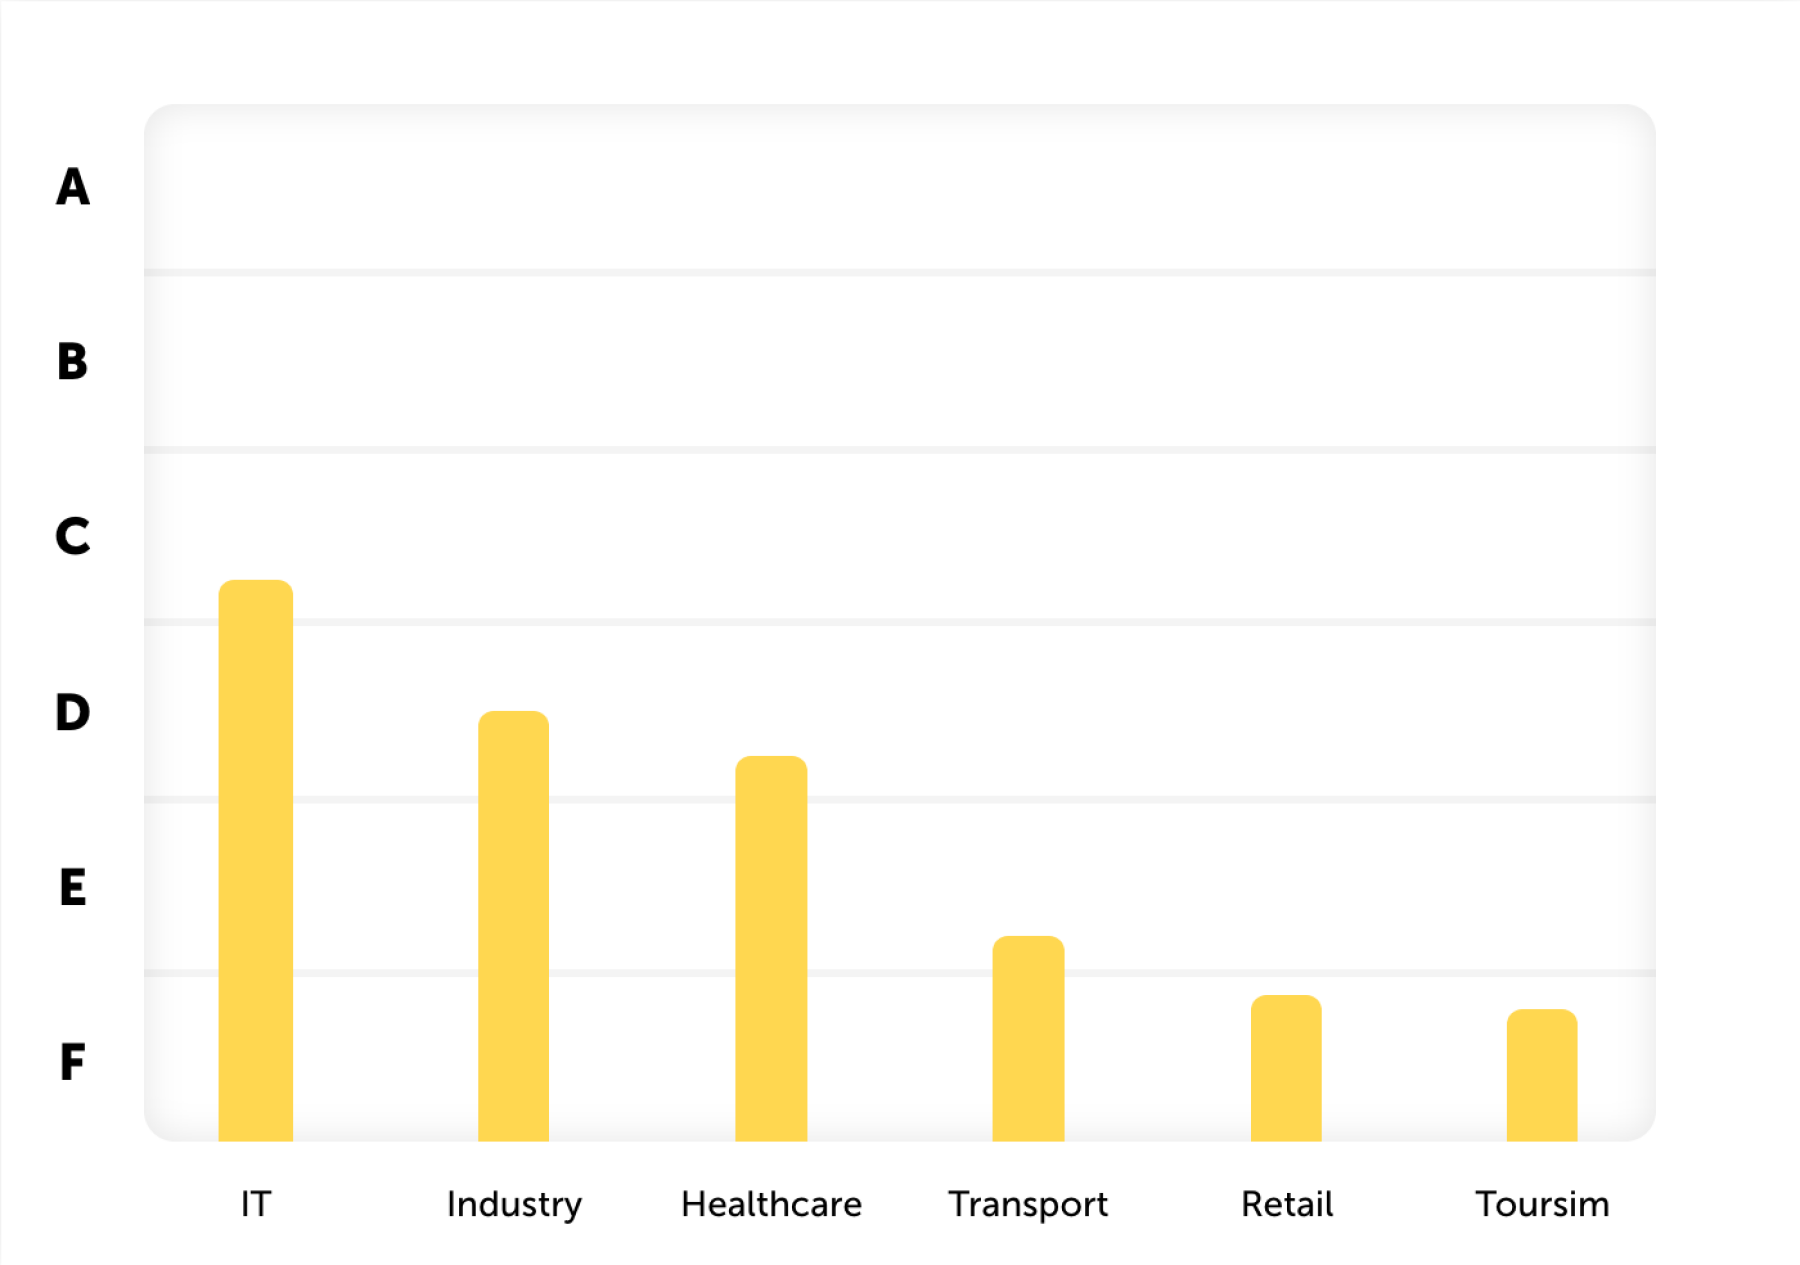 Average rating of the security situation of different sectors: IT has rating C; Industry and Health rating D; Transport has rating E, Retail and Tourism rating F.